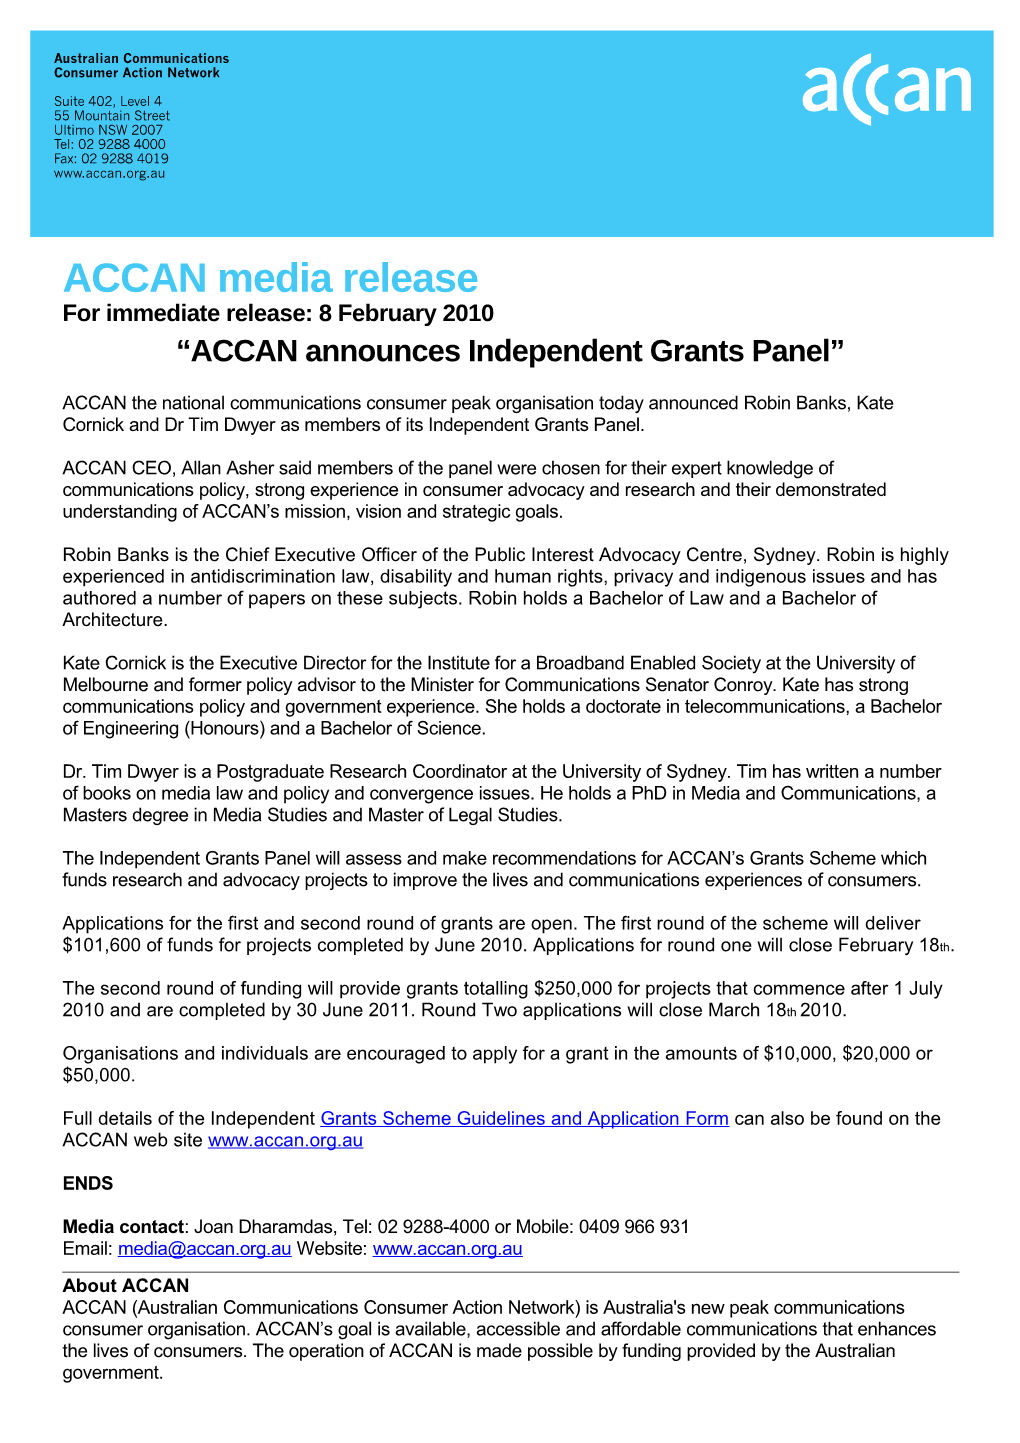 ACCAN Announces Independent Grants Panel